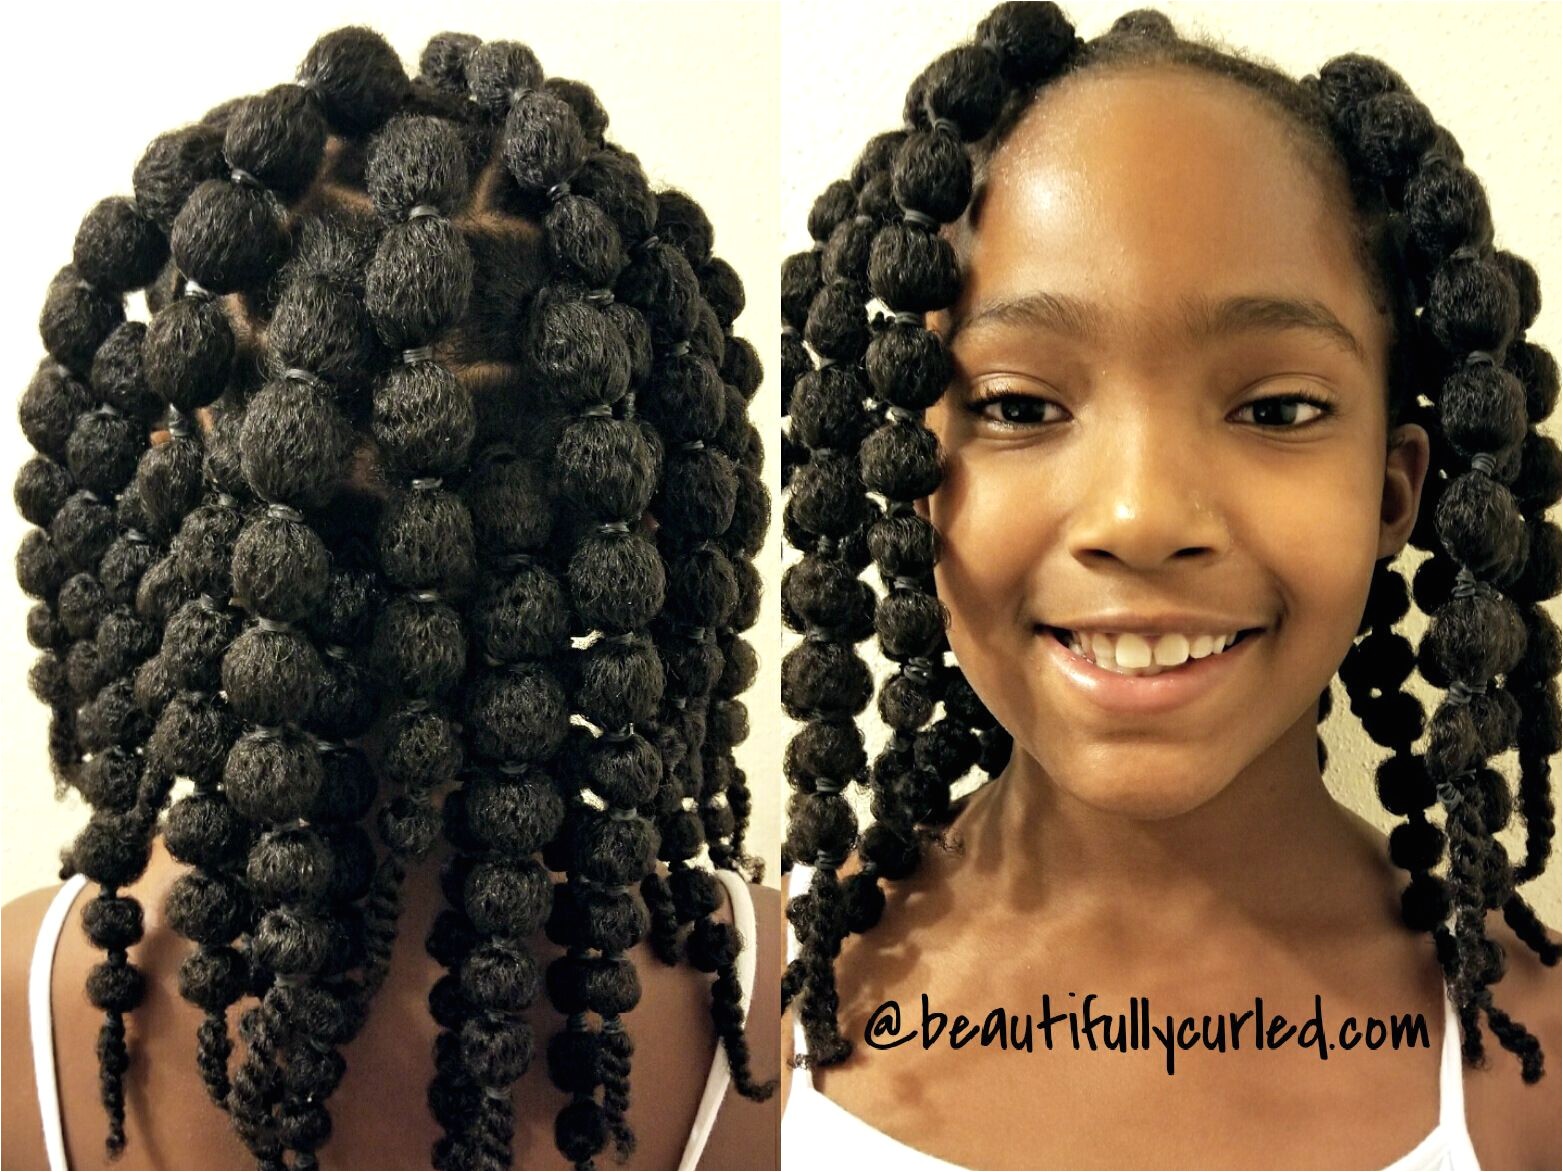 Cute Young Girl Hairstyles Cute and Easy Hair Puff Balls Hairstyle for Little Girls to